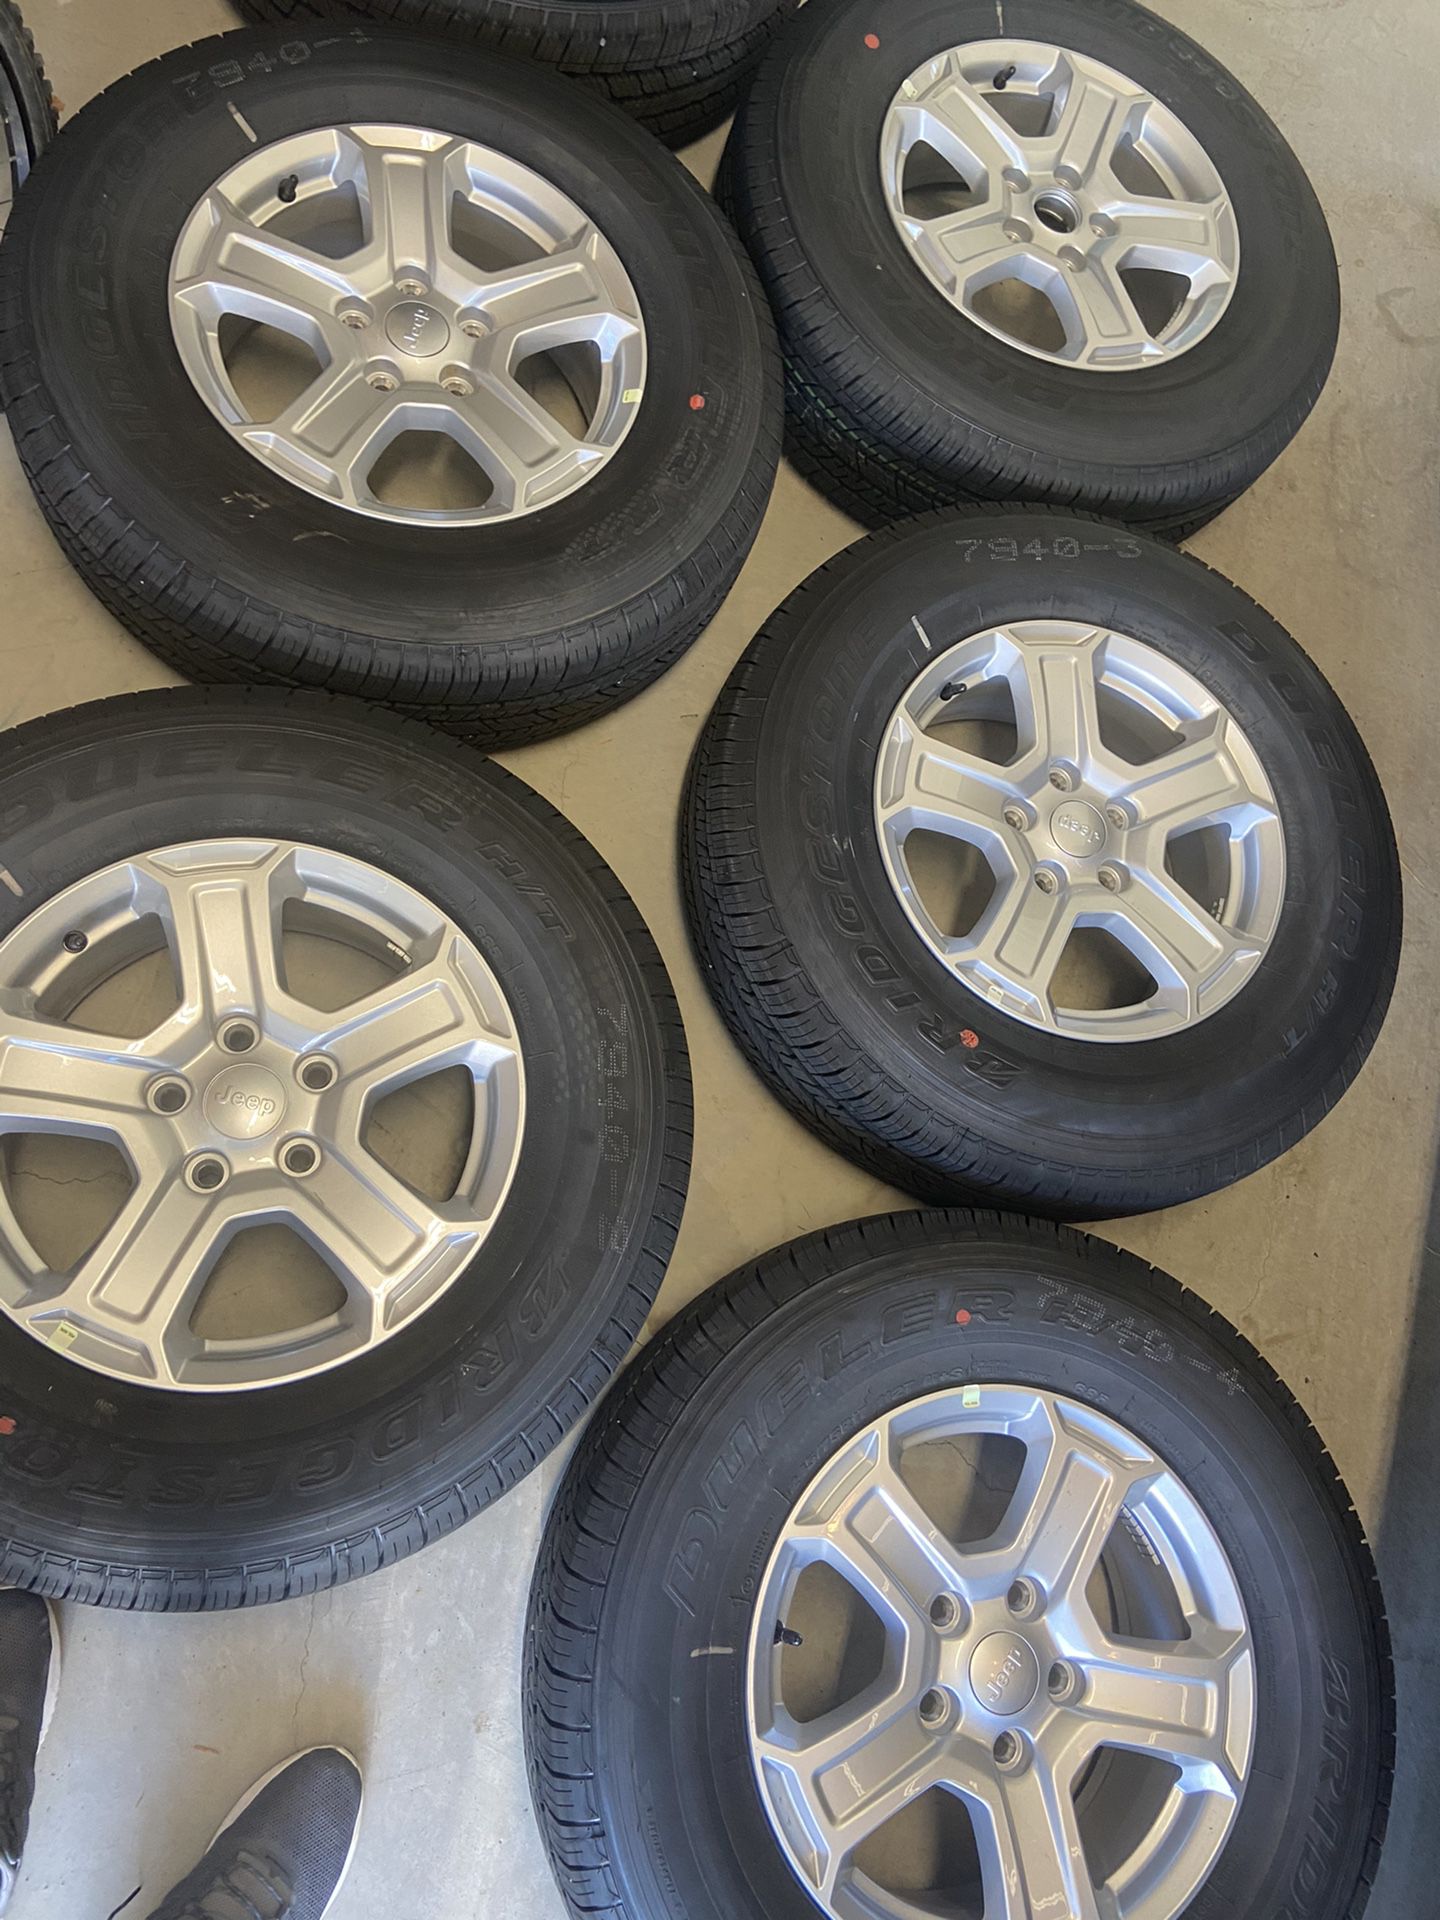 Set of 5 Jeep Wrangler wheels and tire